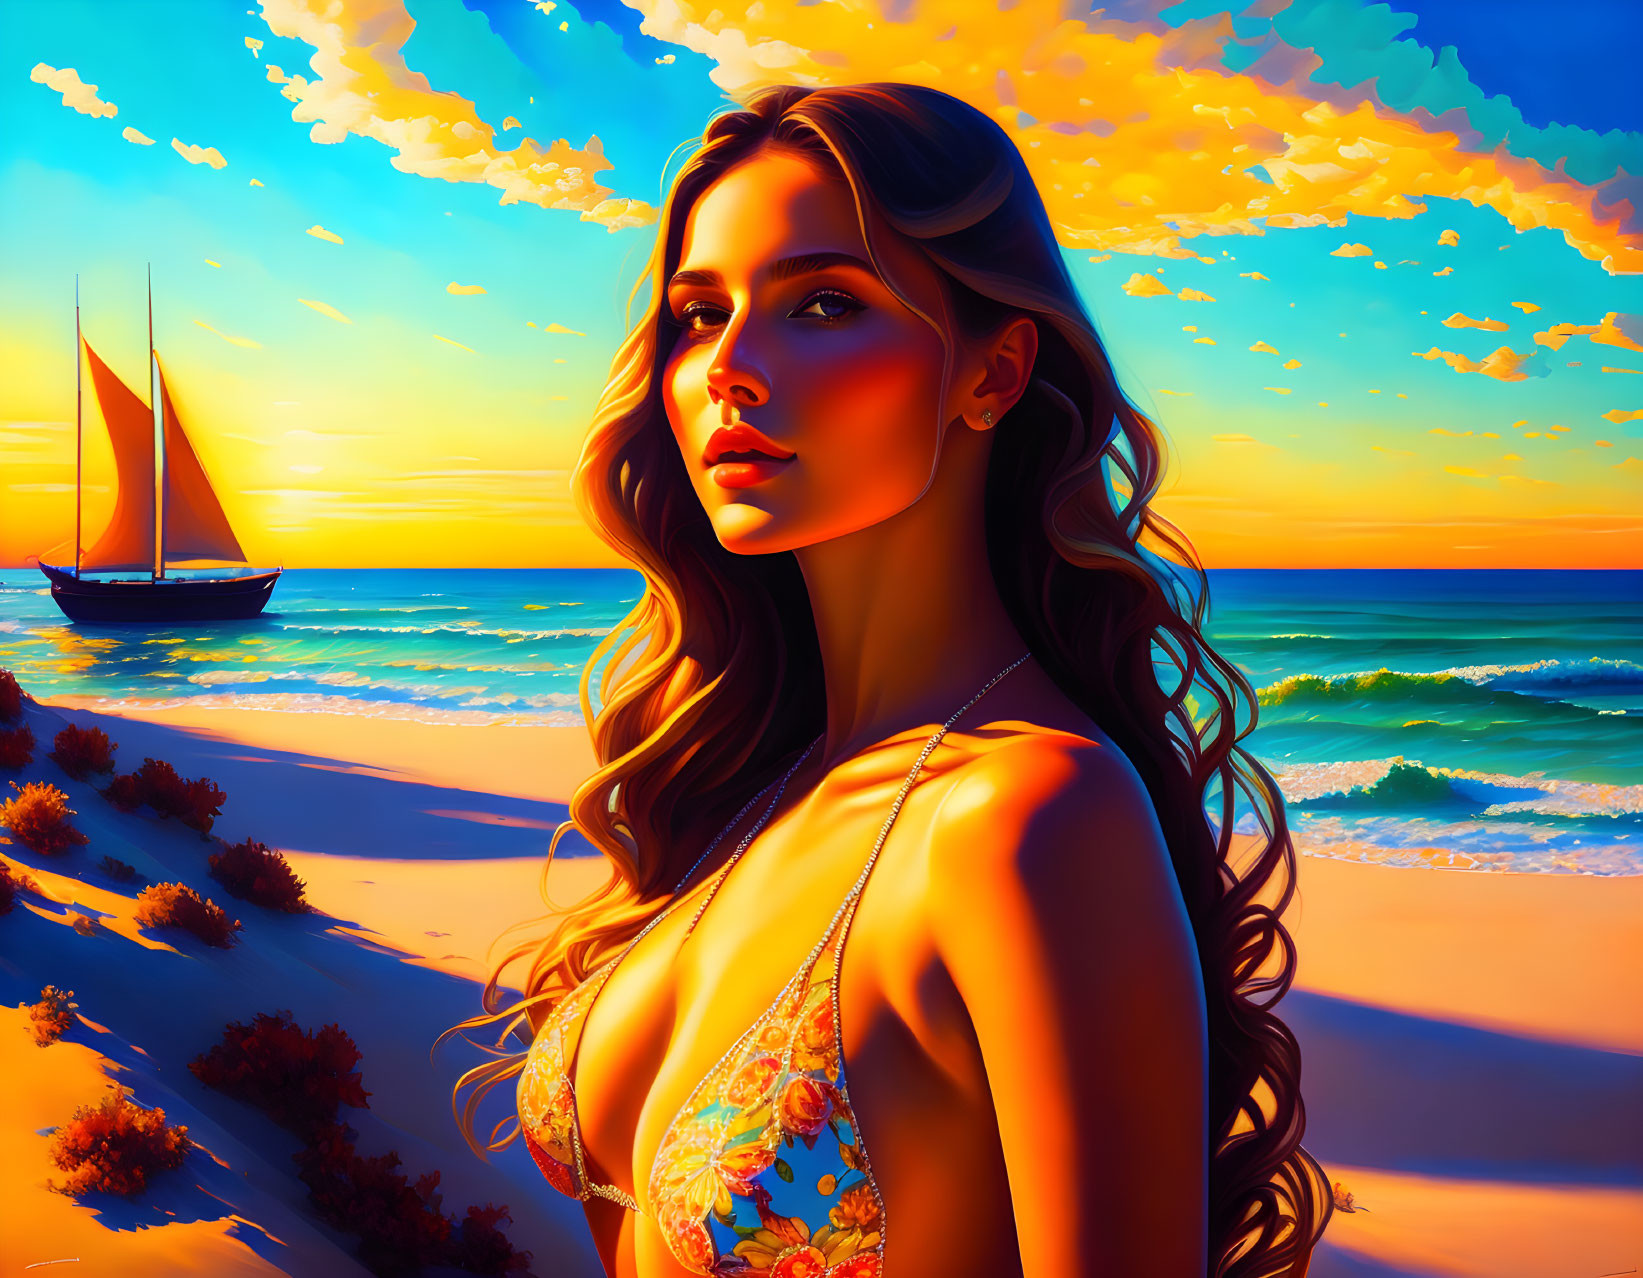 Woman with long hair on beach at sunset with sailboat in distance